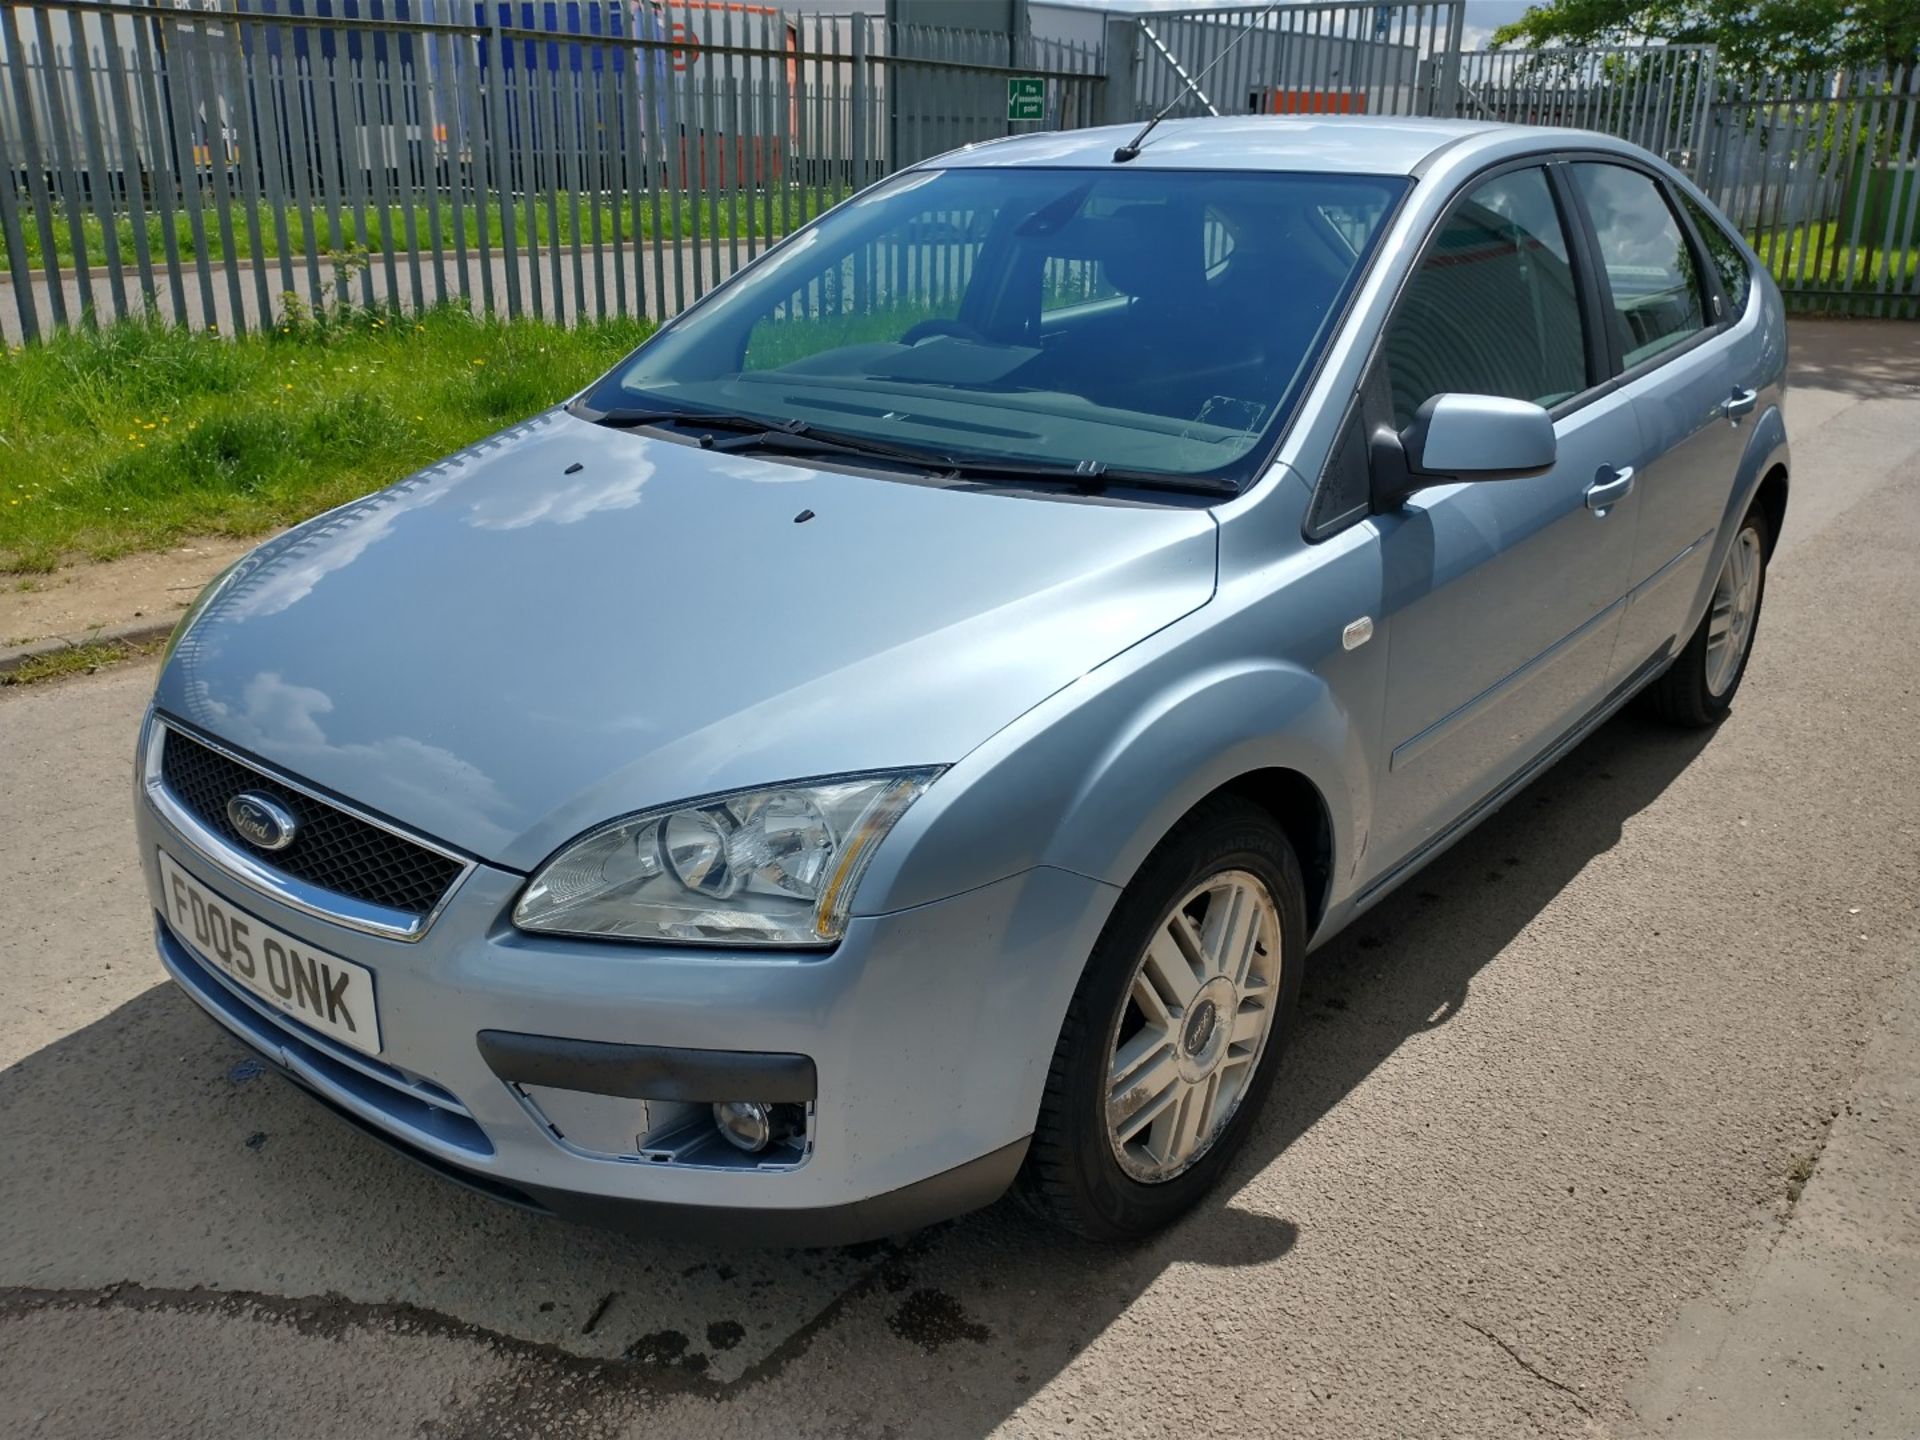 2005 Ford Focus Ghia T 5dr Hatchback - CL505 - NO VAT ON THE HAMMER - Location: Corby - Image 2 of 20